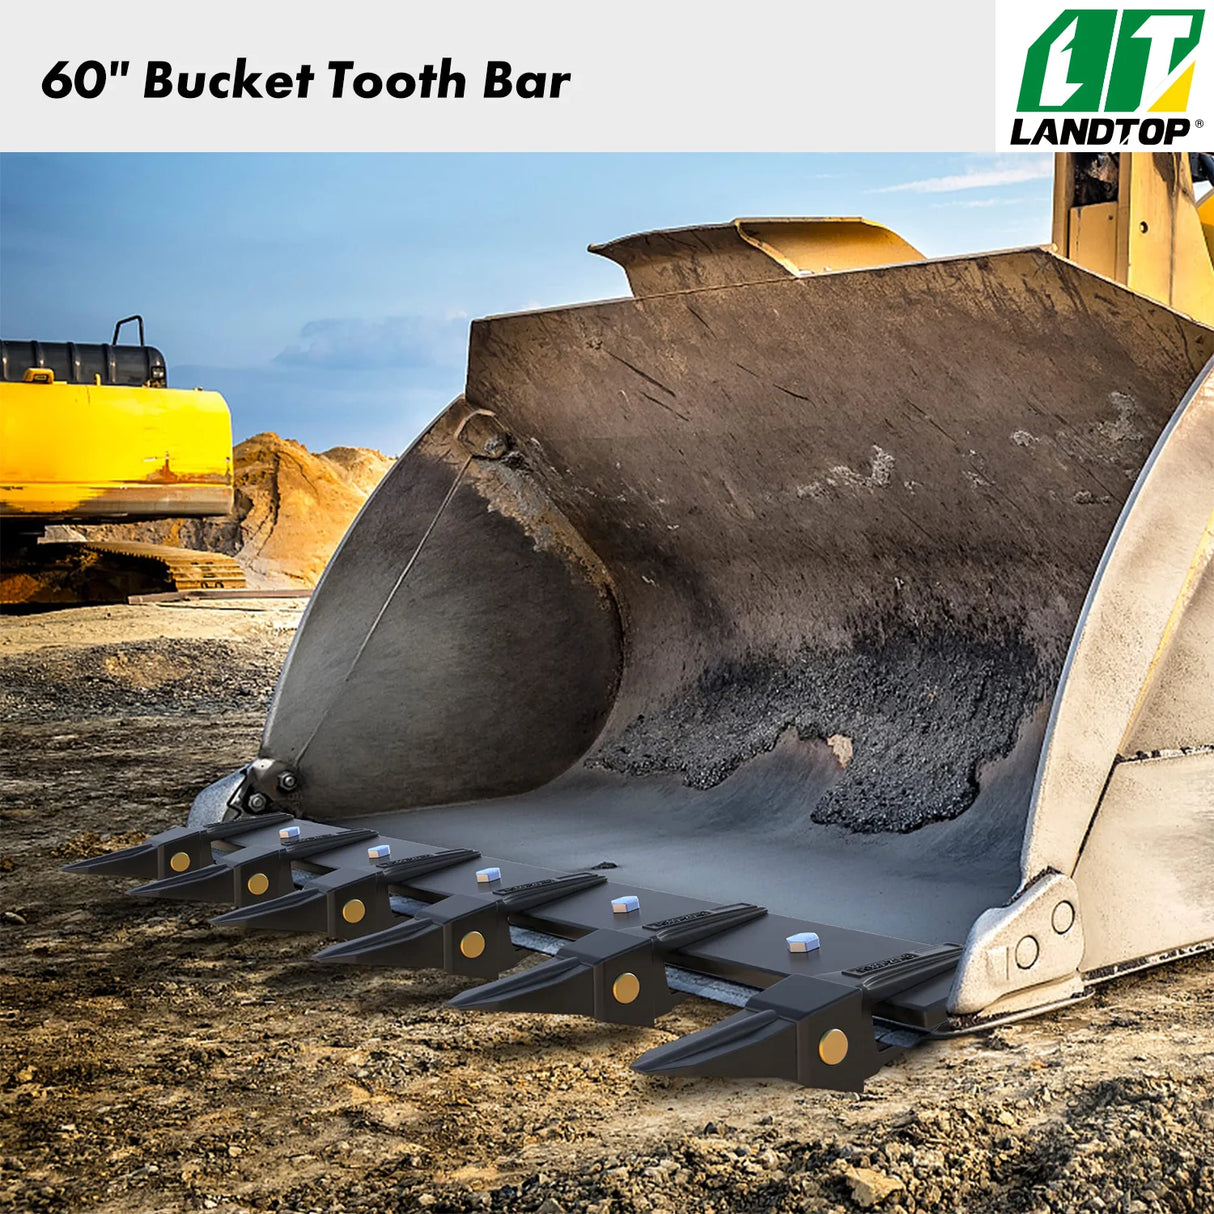 60" Bucket Tooth Kit for Loader Tractor for Bucket Protection Steel